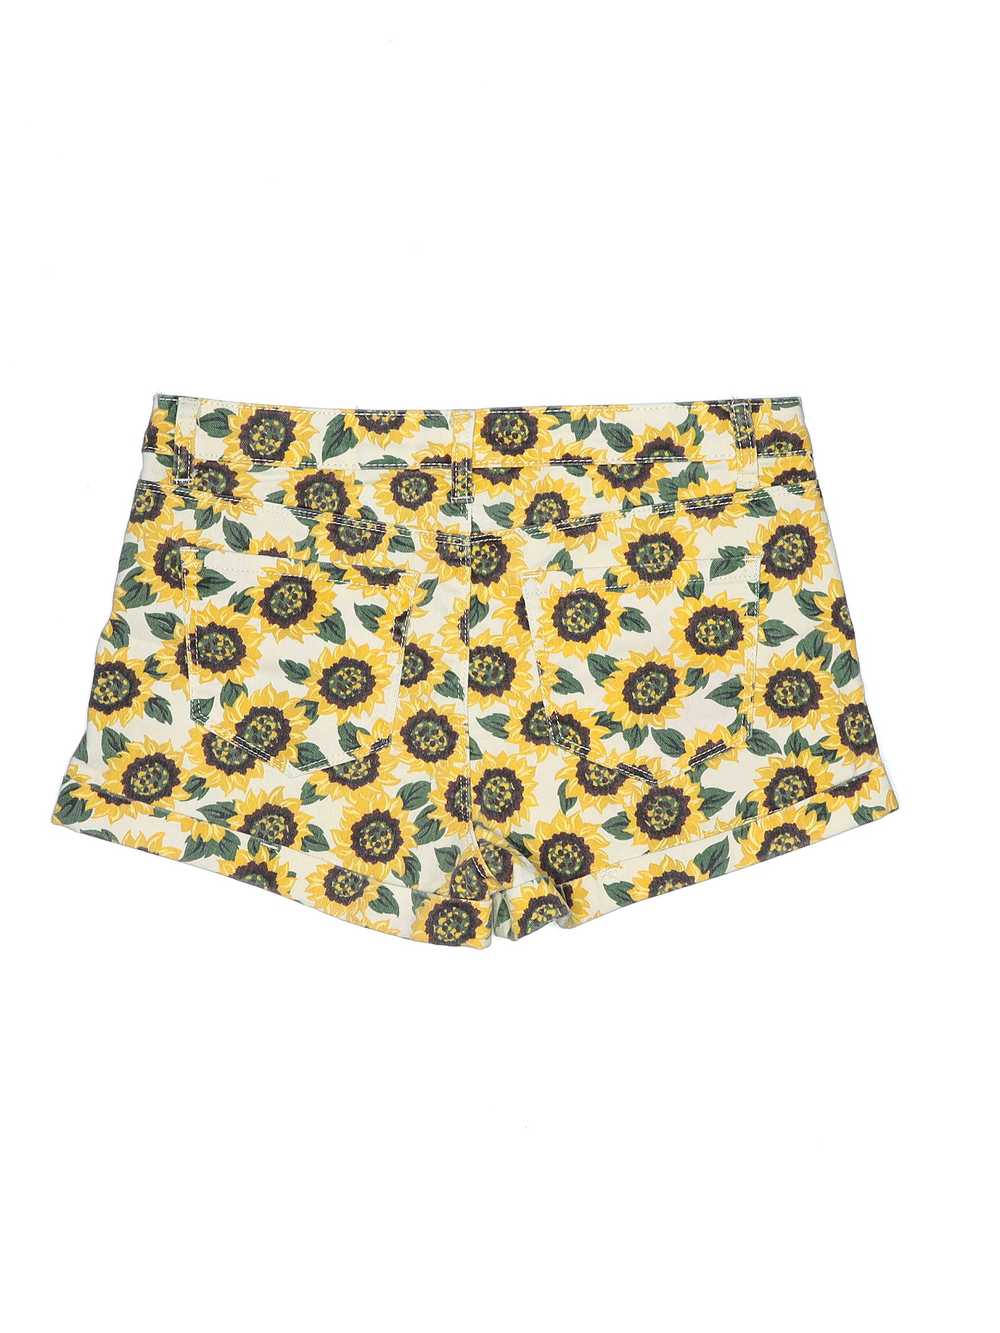 Forever 21 Women Yellow Shorts 29W - image 2